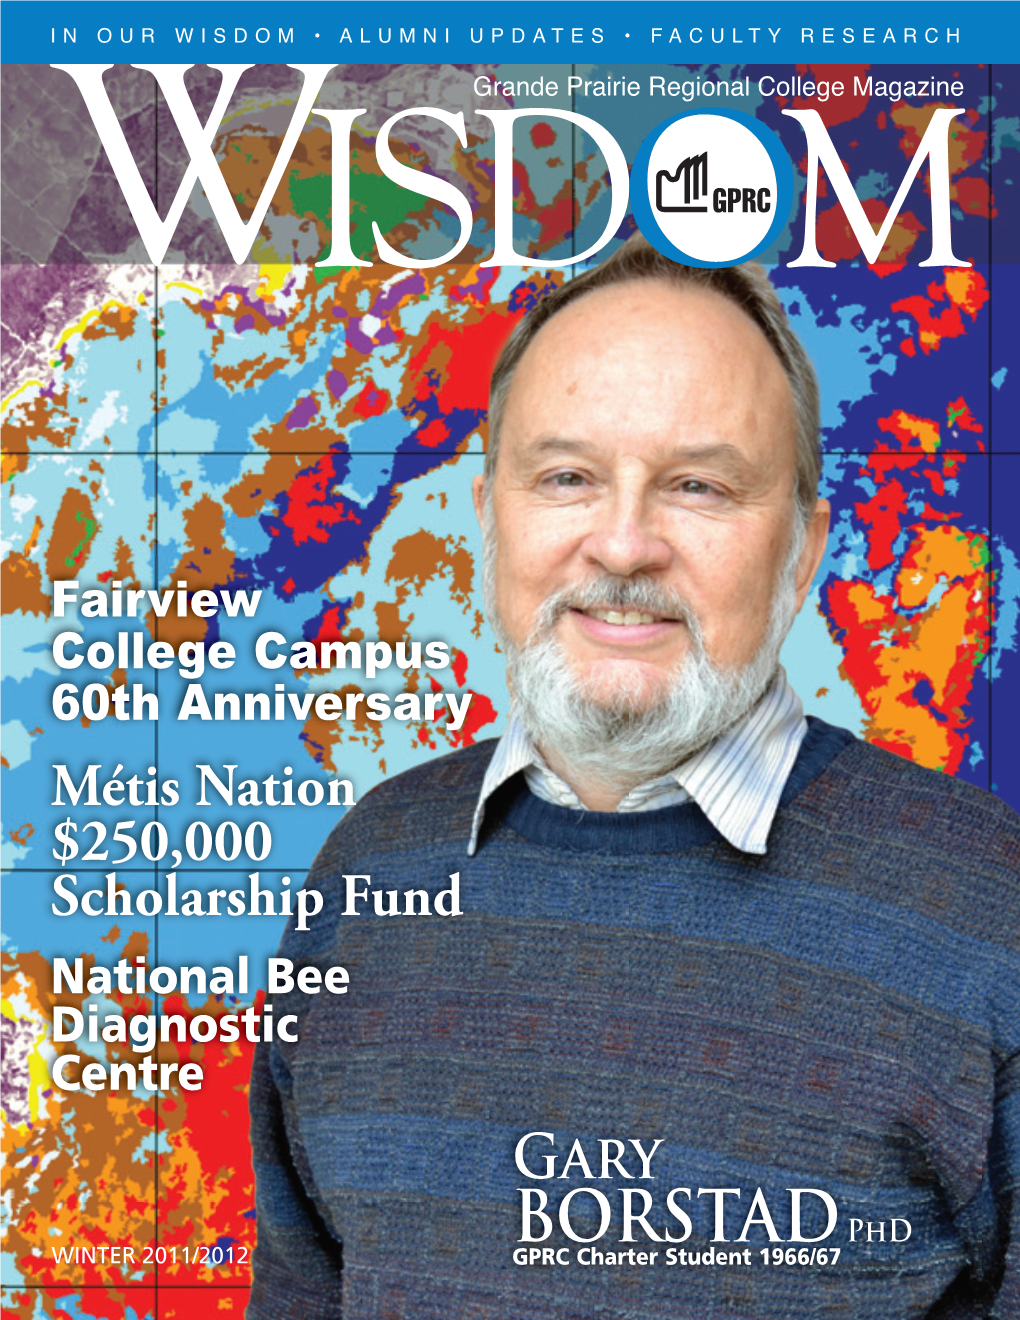 Fairview College Campus 60Th Anniversary Métis Nation $250,000 Scholarship Fund National Bee Diagnostic Centre Gary